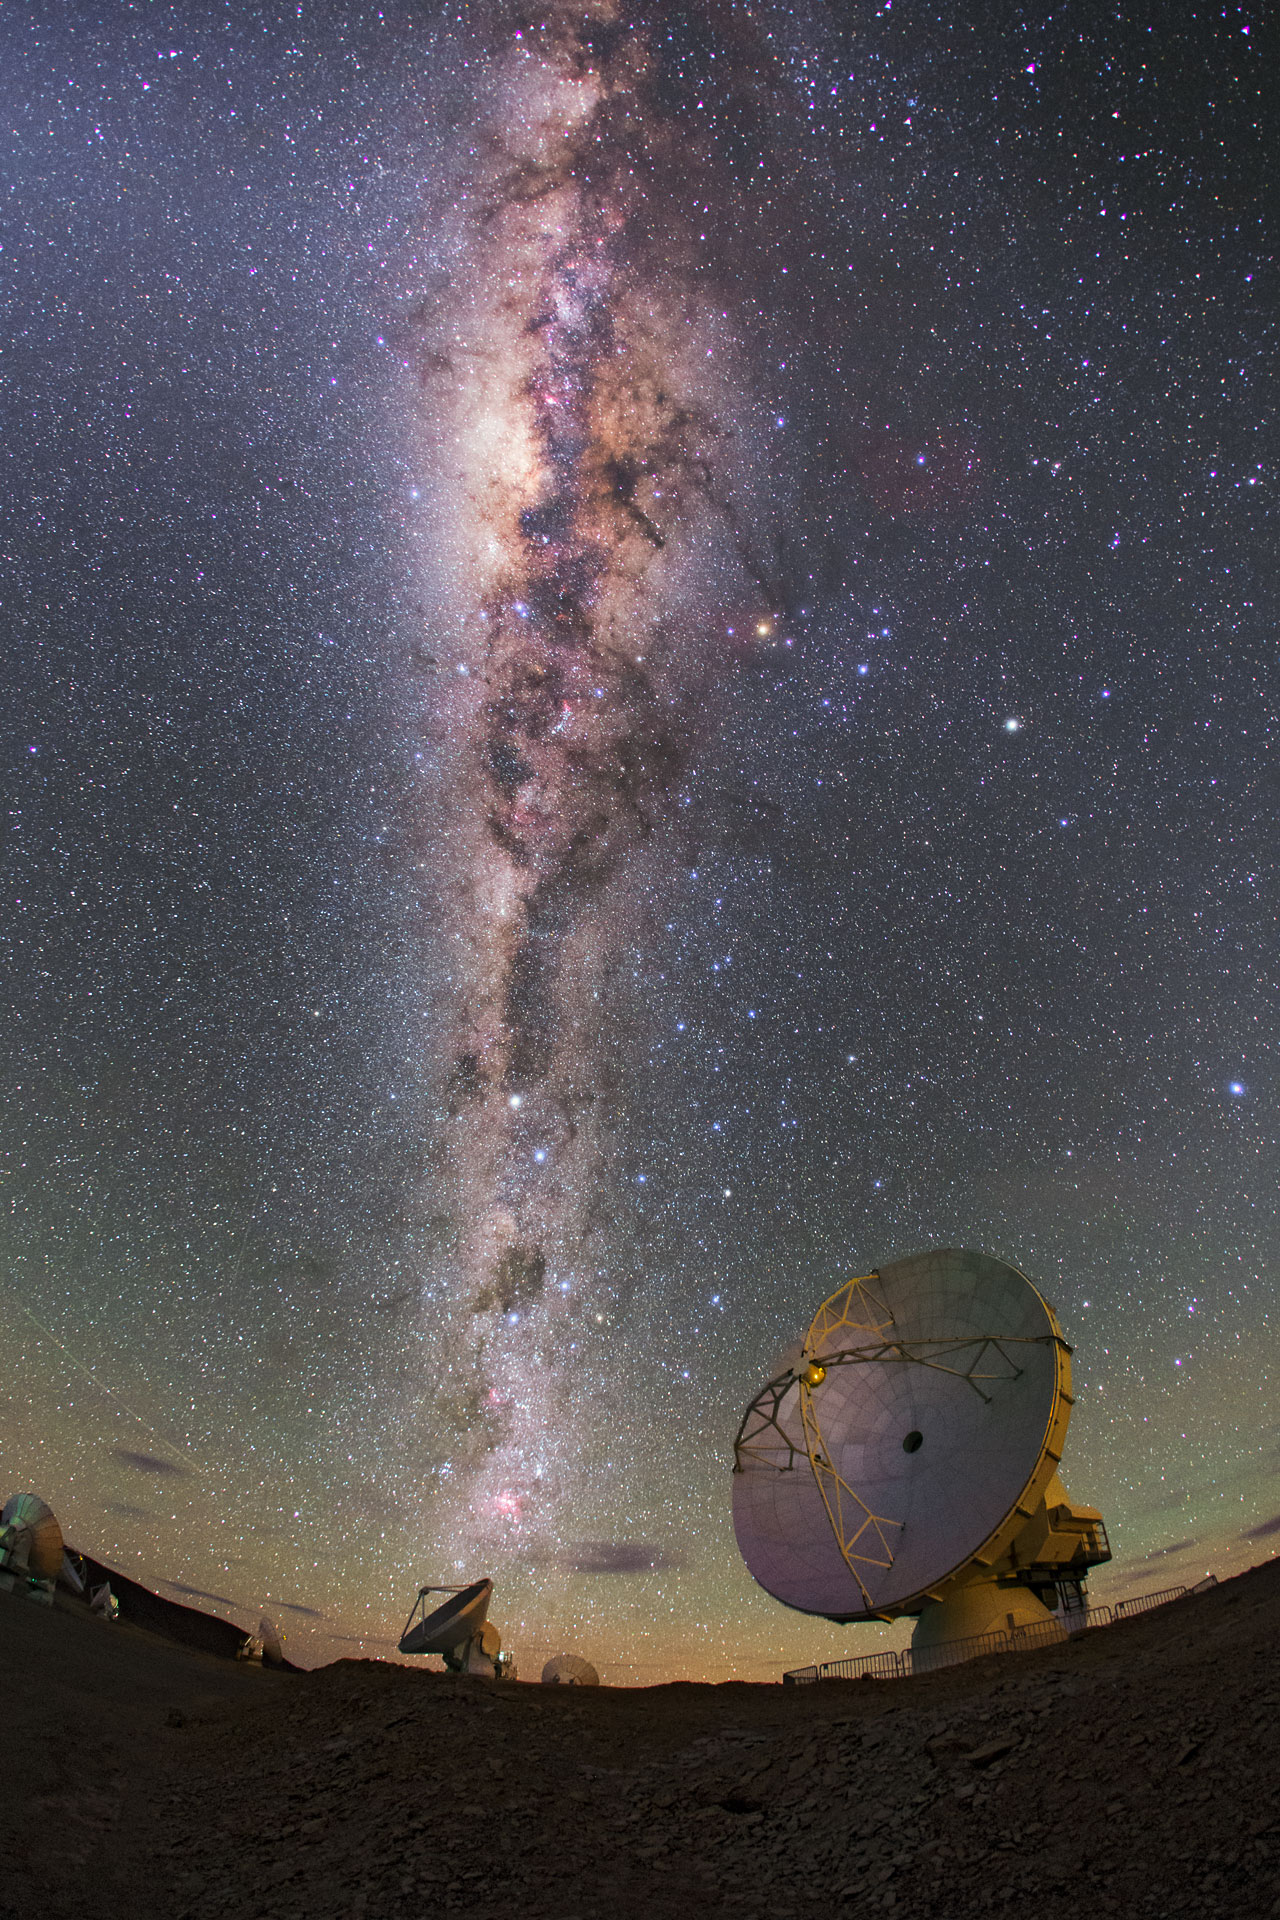 http://www.eso.org/public/archives/images/screen/uhd_img_2528_cc.jpg